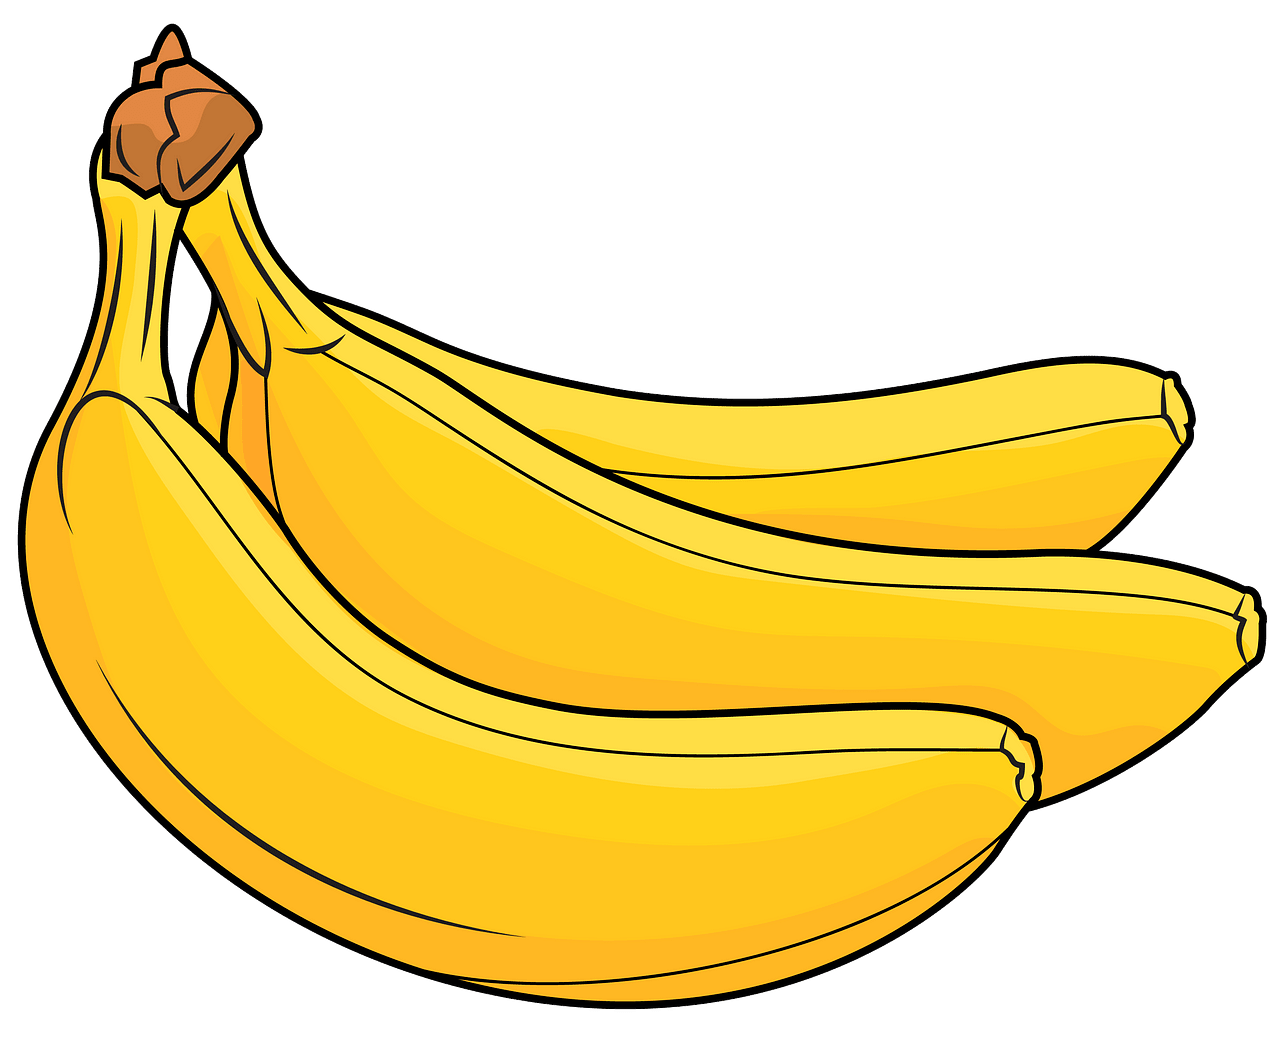 Banana Clipart : Choose from over a million free vectors, clipart ...